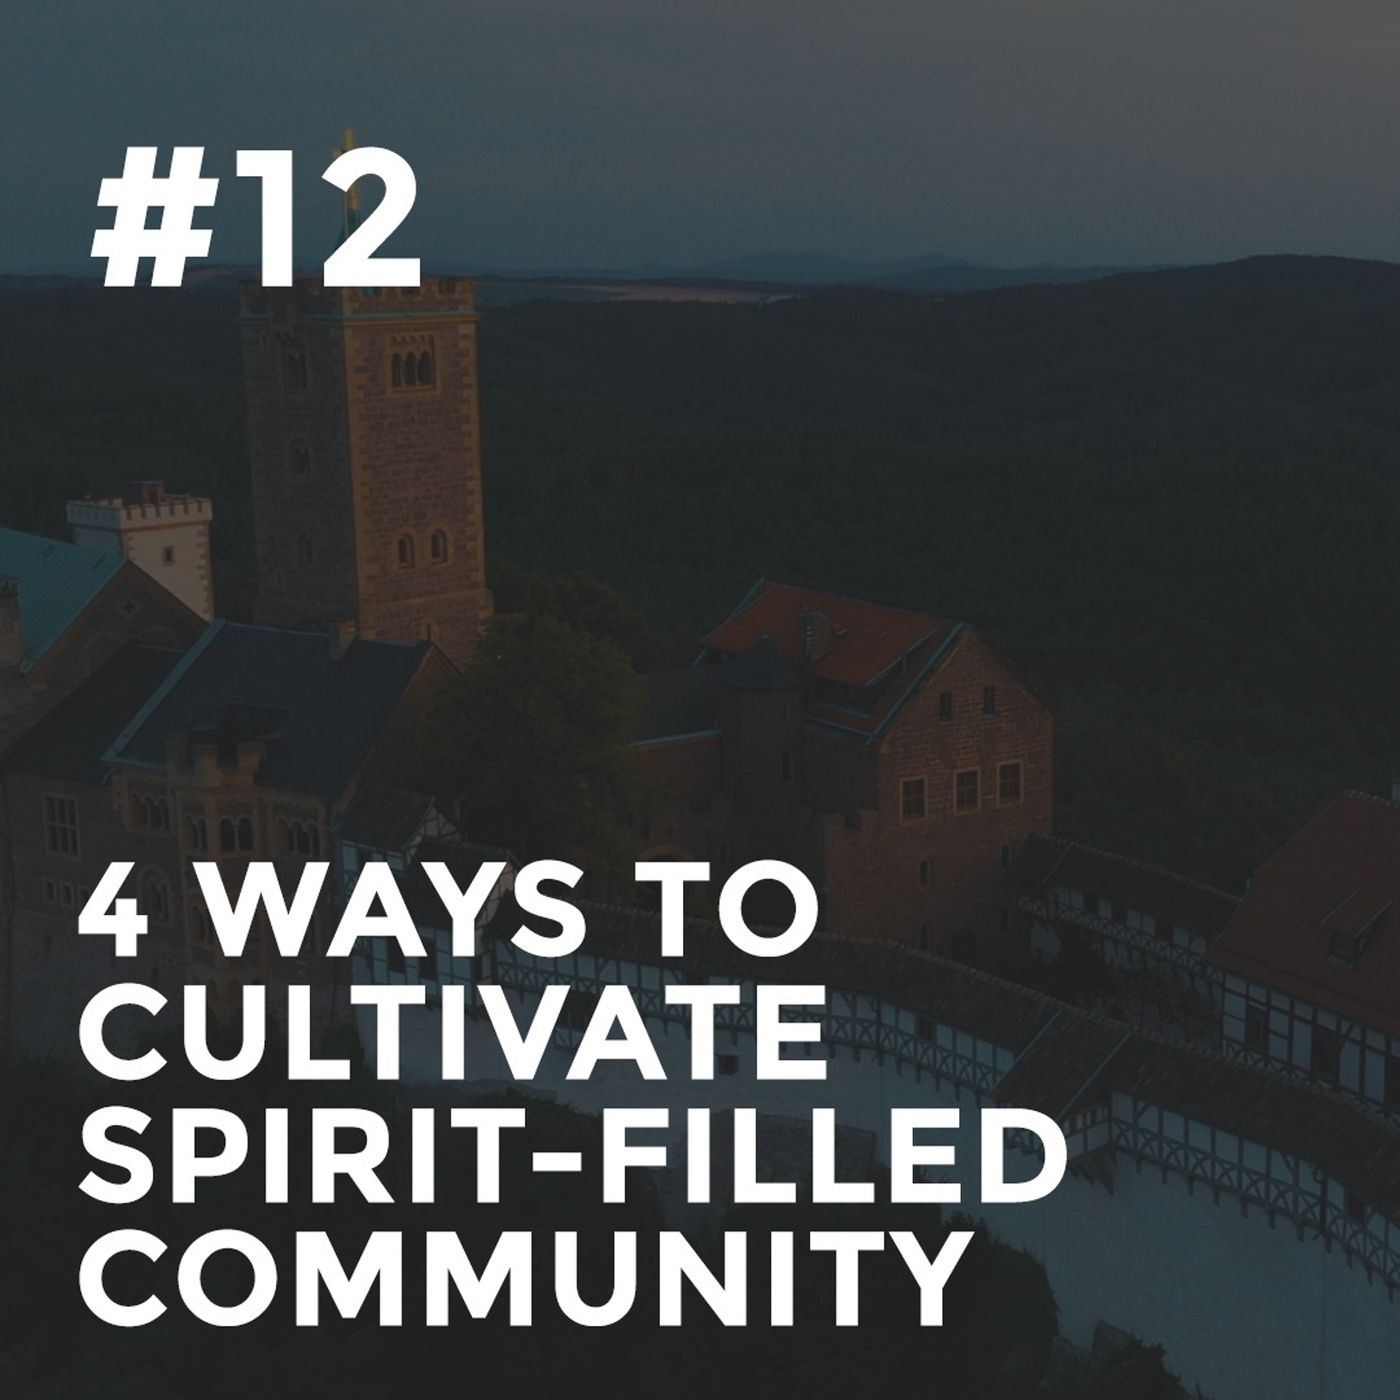 Galatians #12 - 4 Ways to Cultivate Spirit-Filled Community